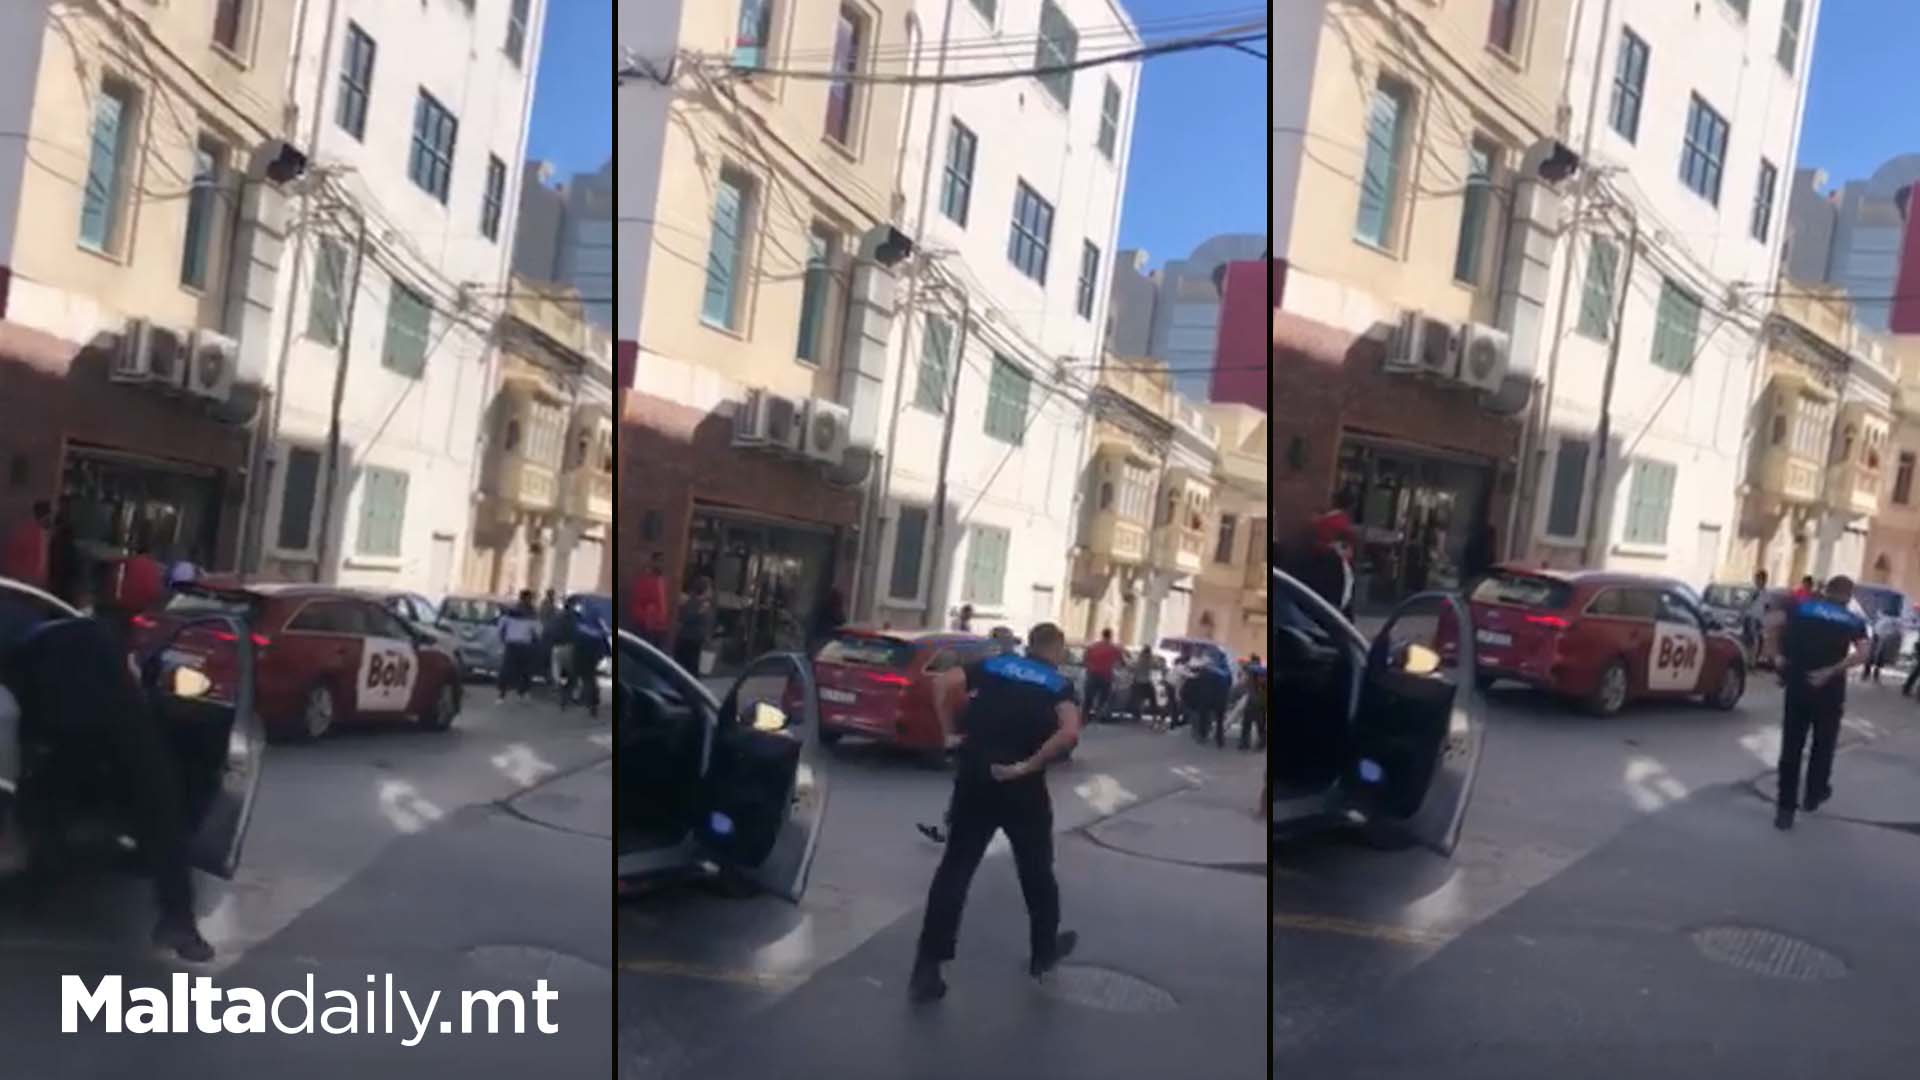 Police Quick To React After Fight Breaks Out In Ħamrun